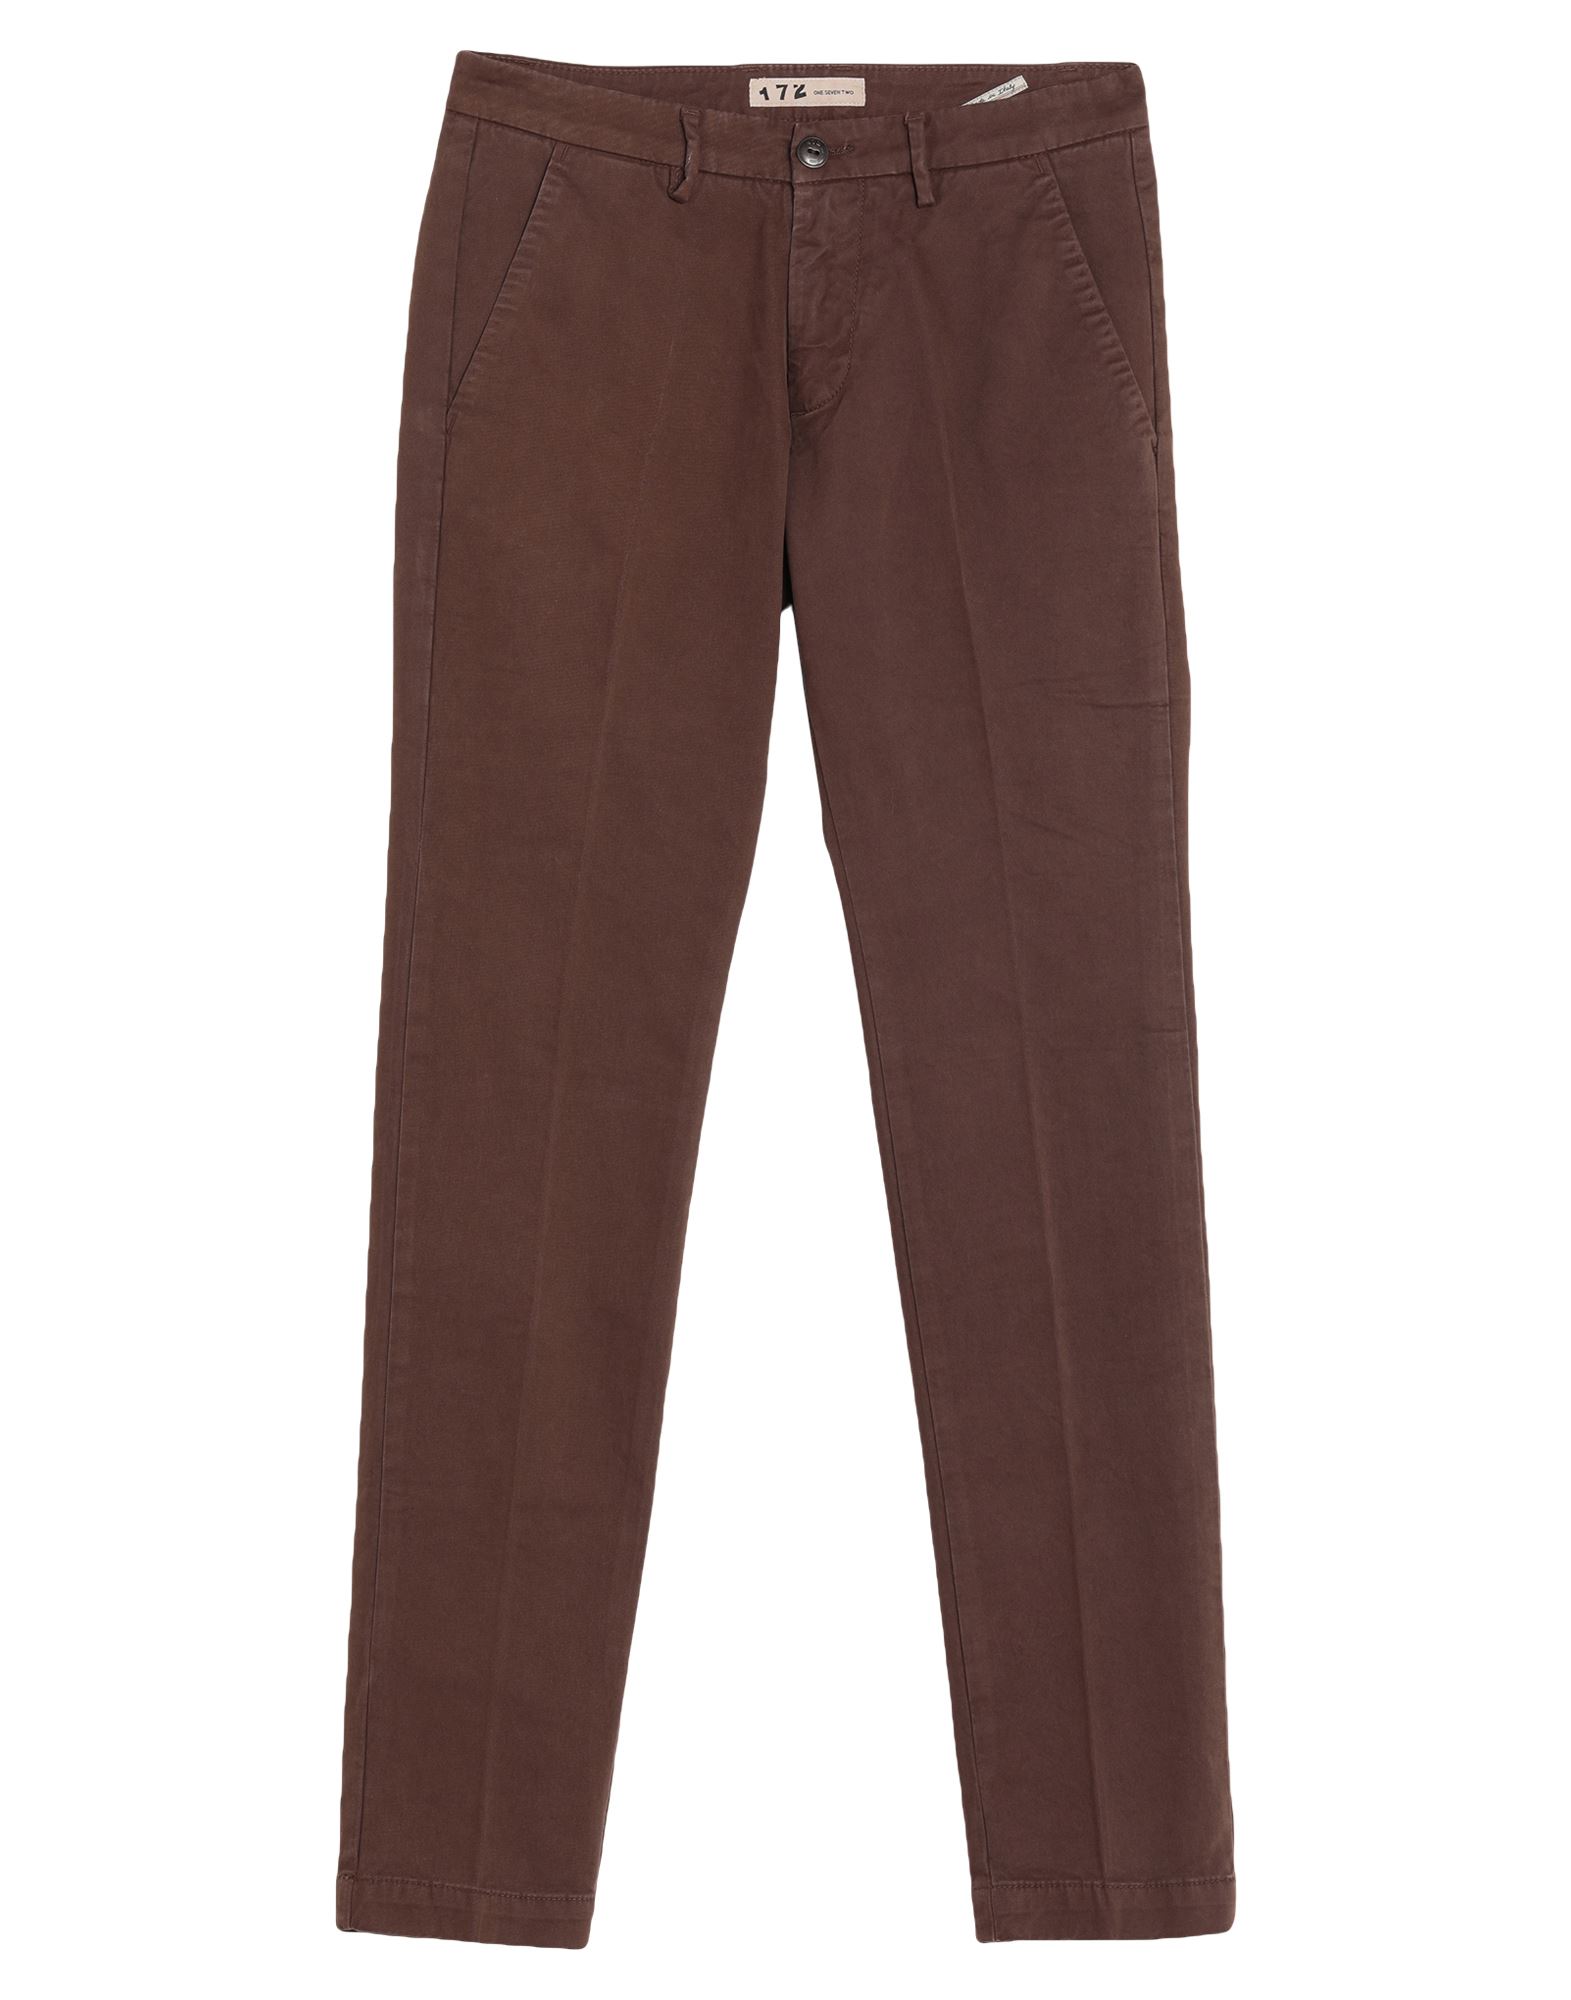 One Seven Two Pants In Dark Brown